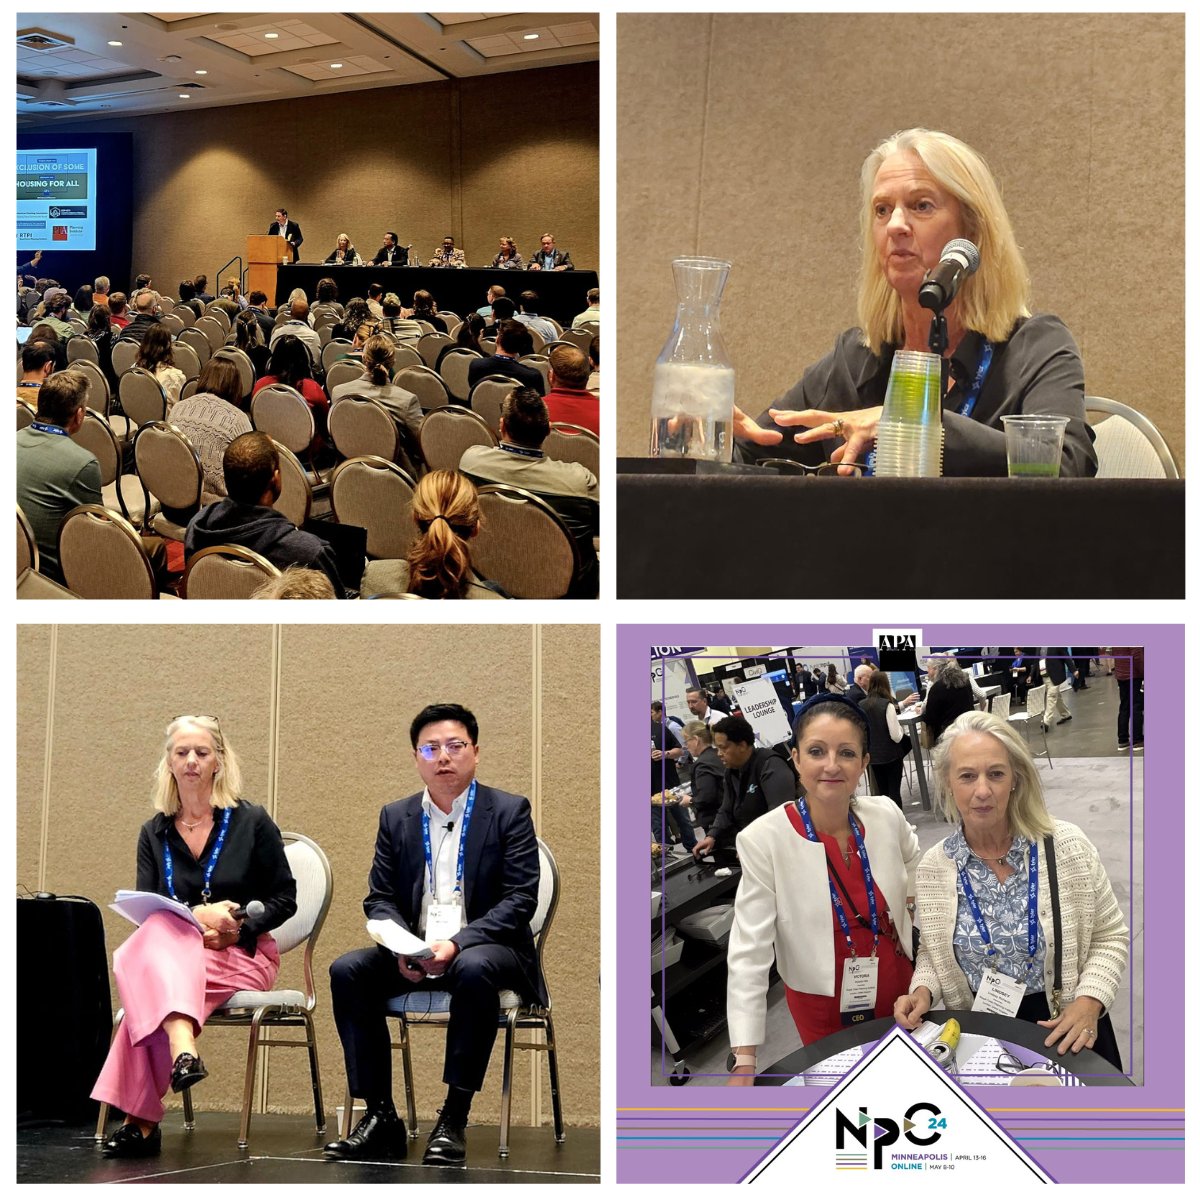 Exciting discussions and activities took place at the National Planning Conference in Minneapolis, where Lindsey Richards shared insights on embedding social value in health-led planning policy and decision-making and pursuing solutions to improve housing affordability.